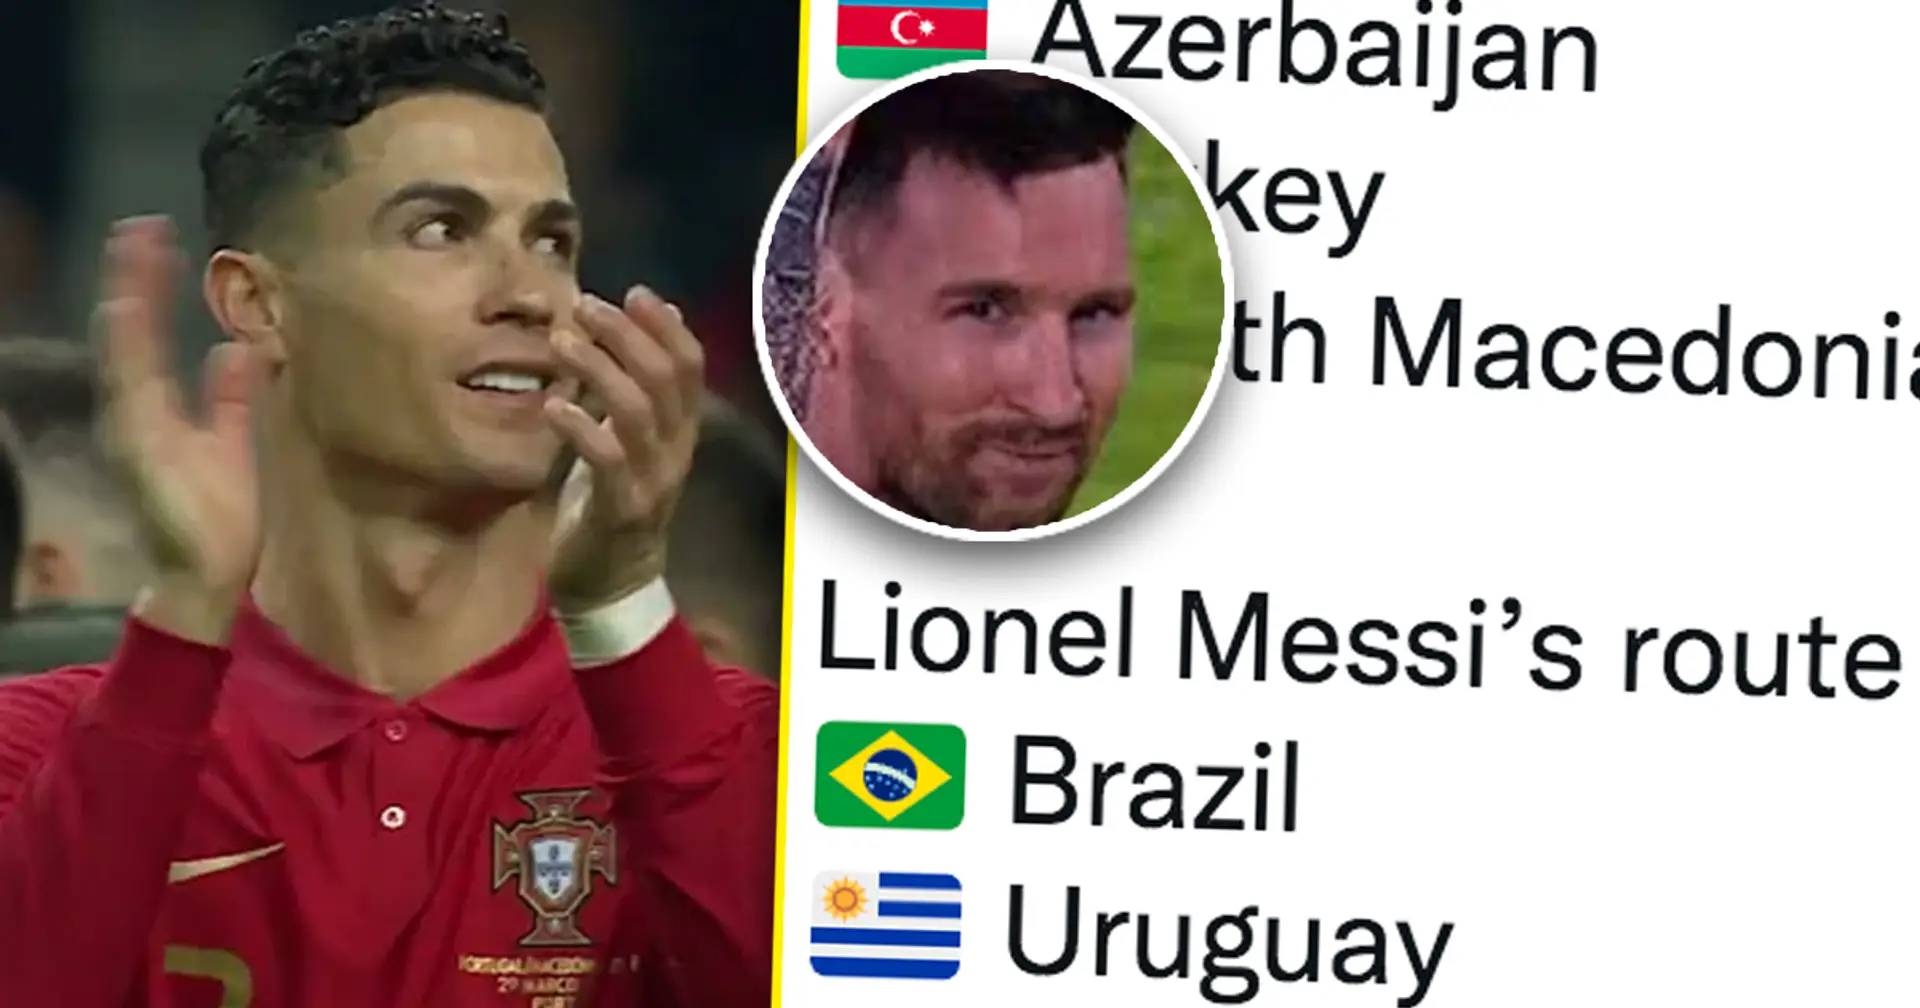 'Levels': Messi's and Ronaldo's 2022 World Cup routes are SO different